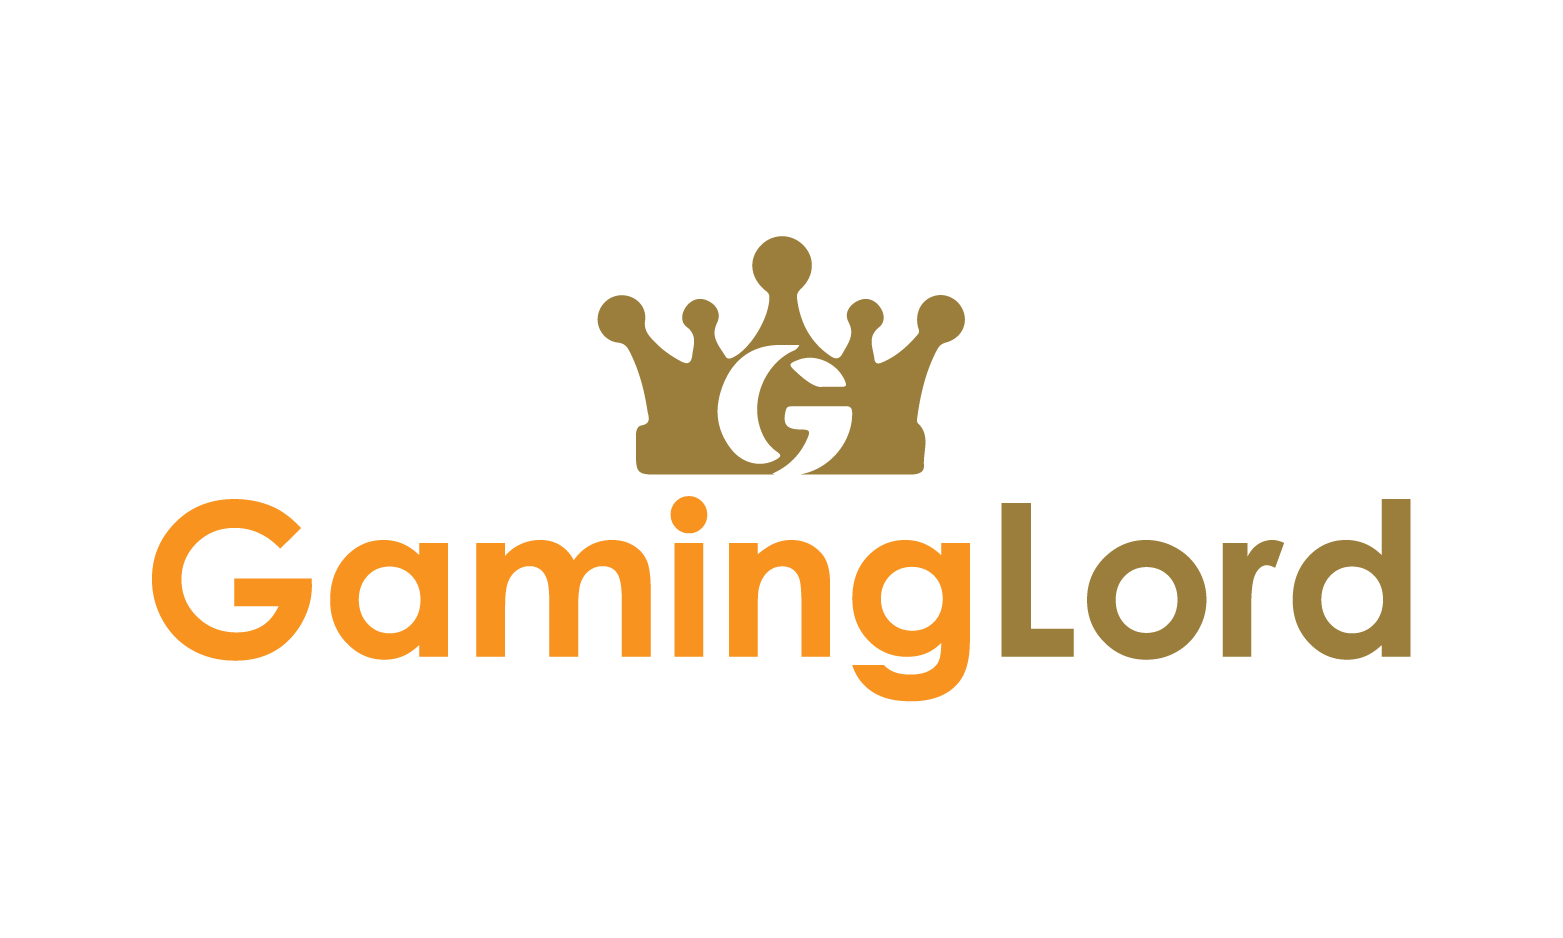 GamingLord.com - Creative brandable domain for sale